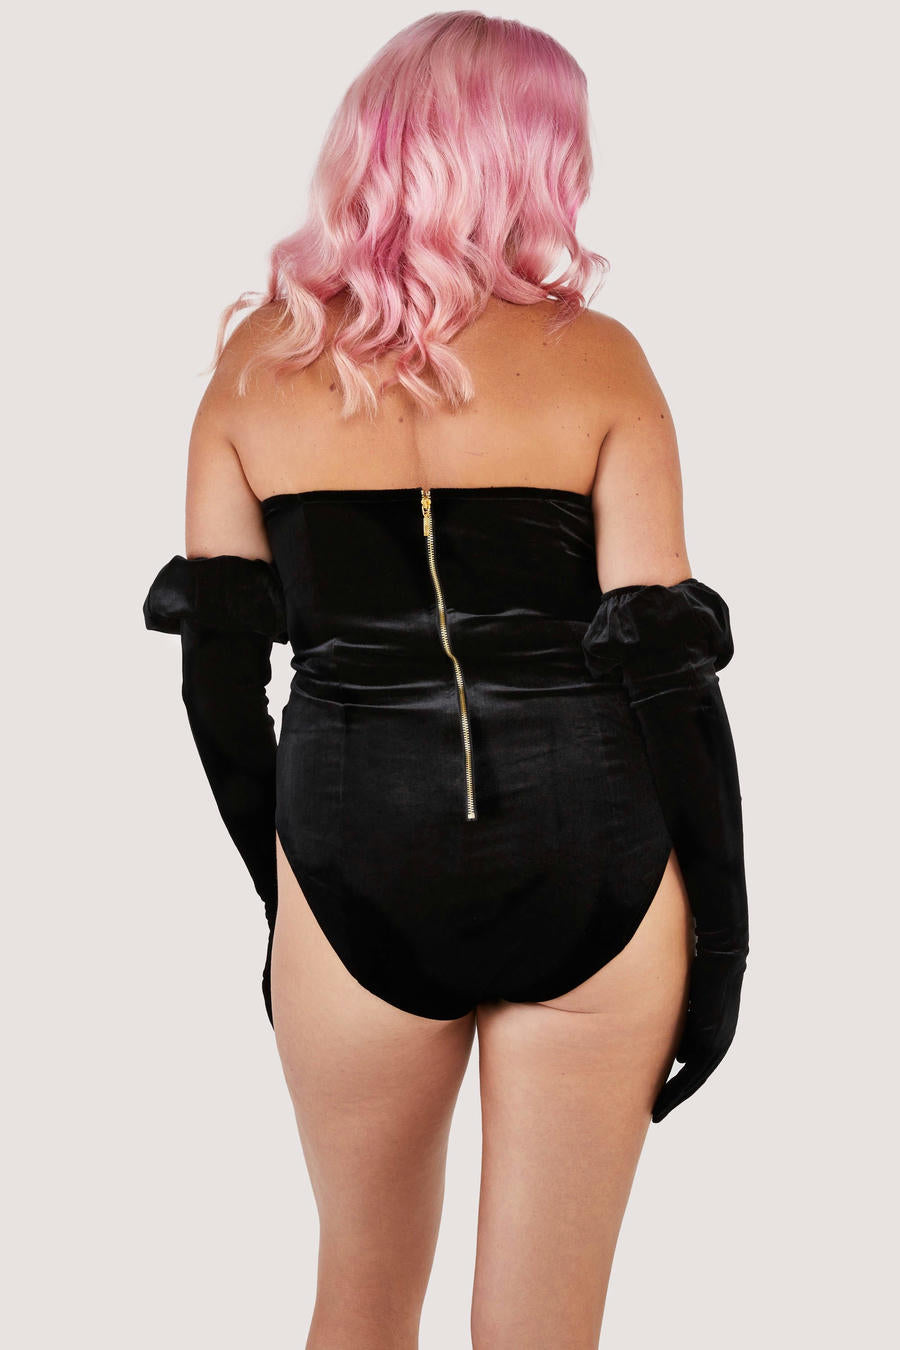 Halina Velvet Bodysuit with puff sleeve gloves by Playful Promises - sizes 4-16